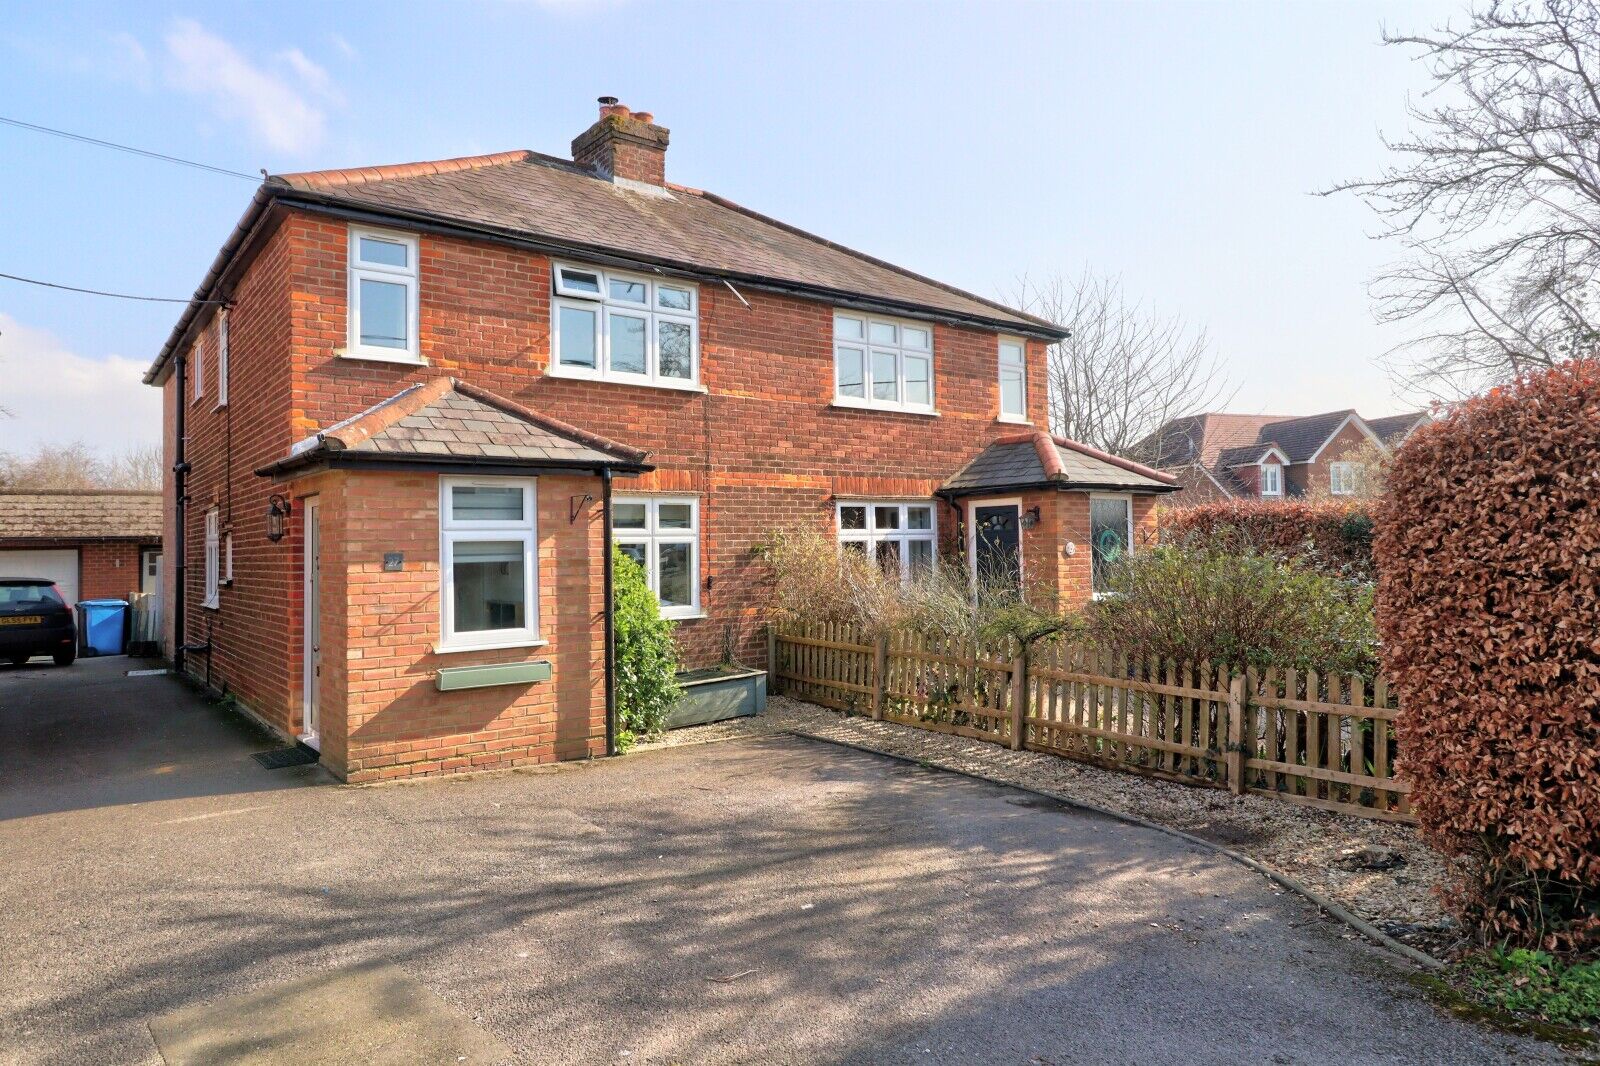 3 bedroom semi detached house for sale Orchard Way, Holmer Green, HP15, main image